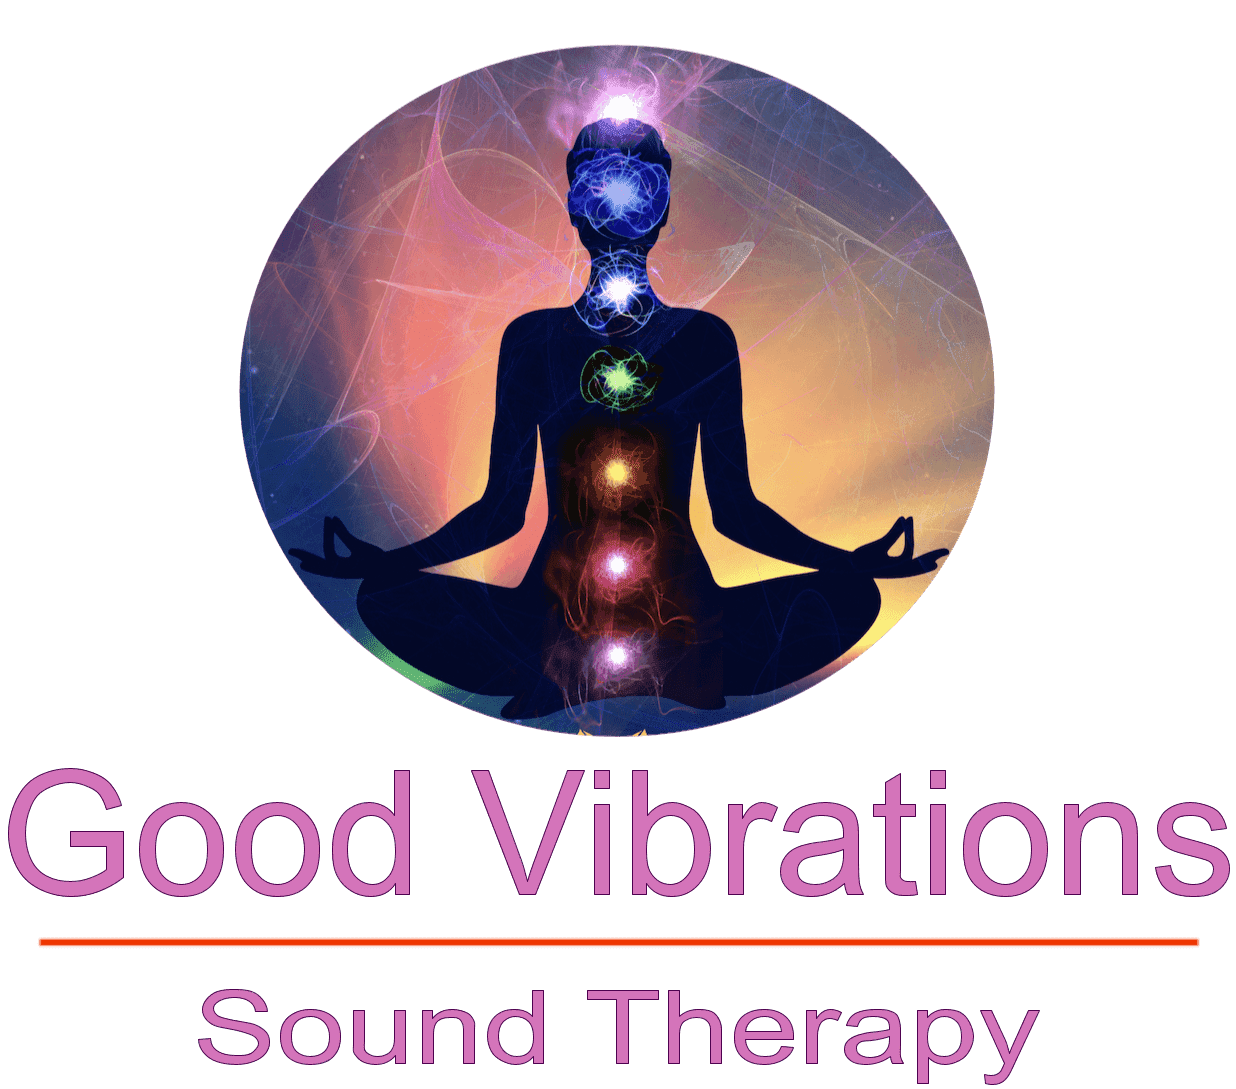 Good Vibrations Sound Therapy